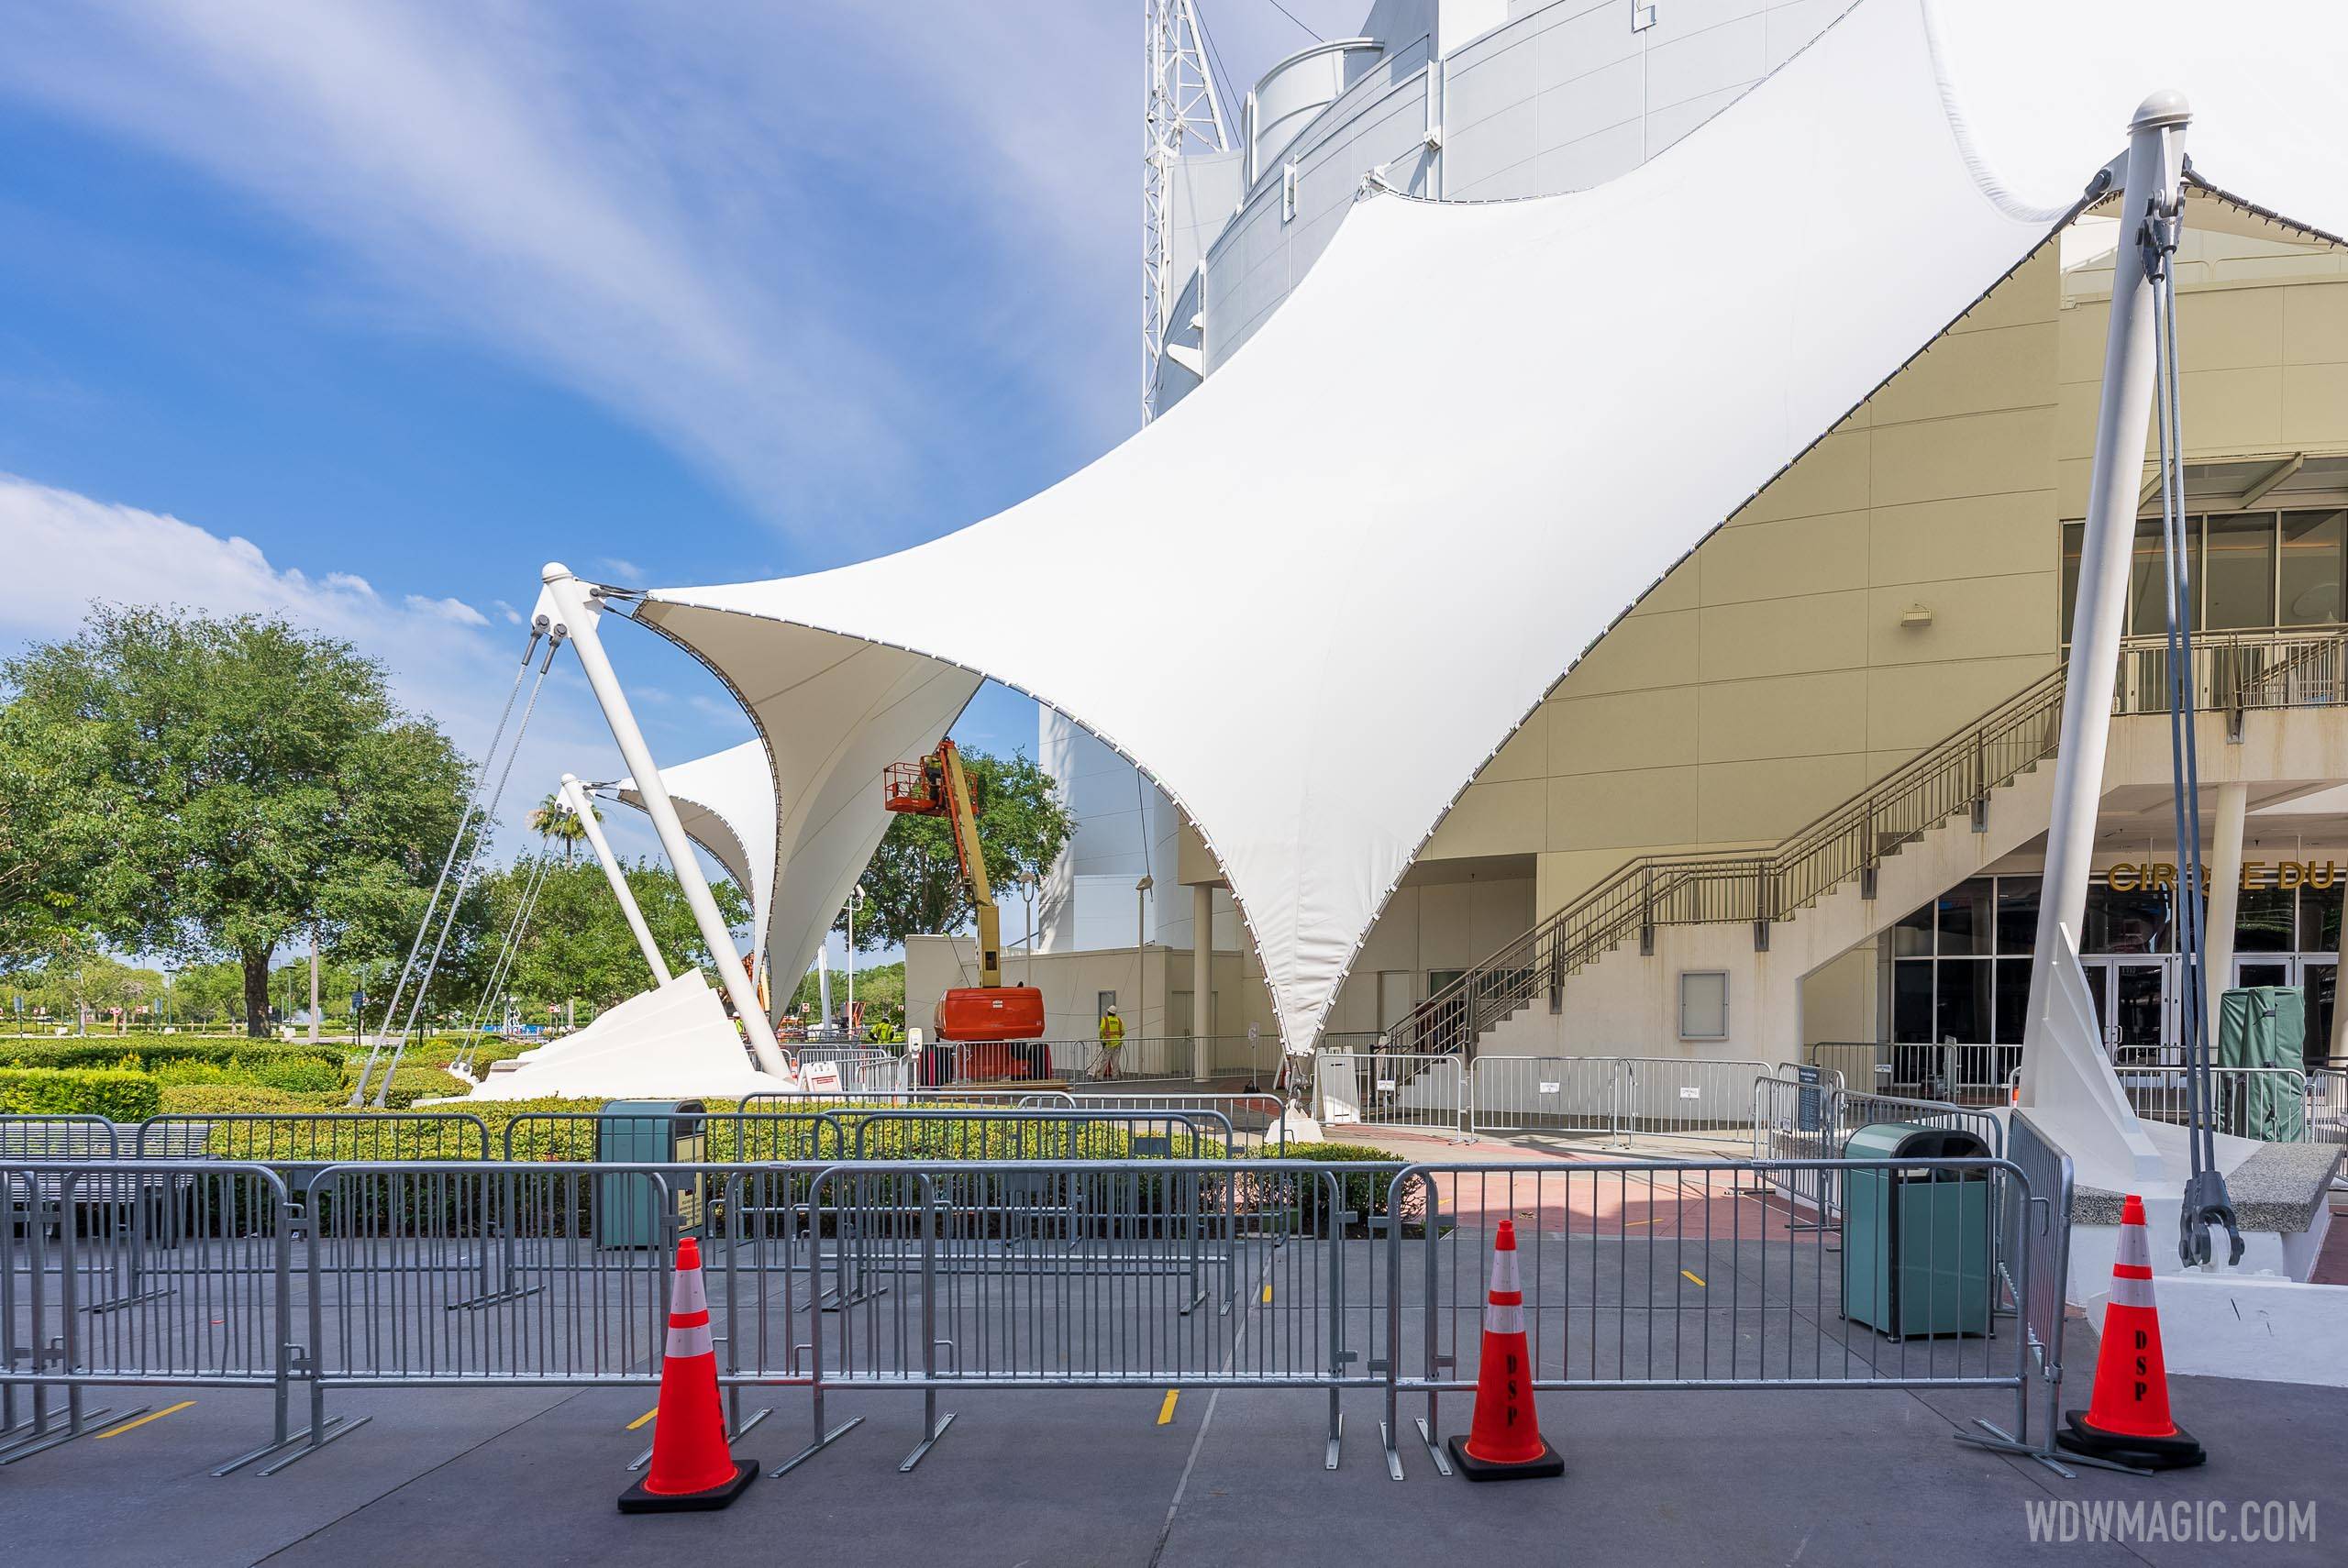 Repainting gets underway on the Cirque du Soleil theater at Disney Springs